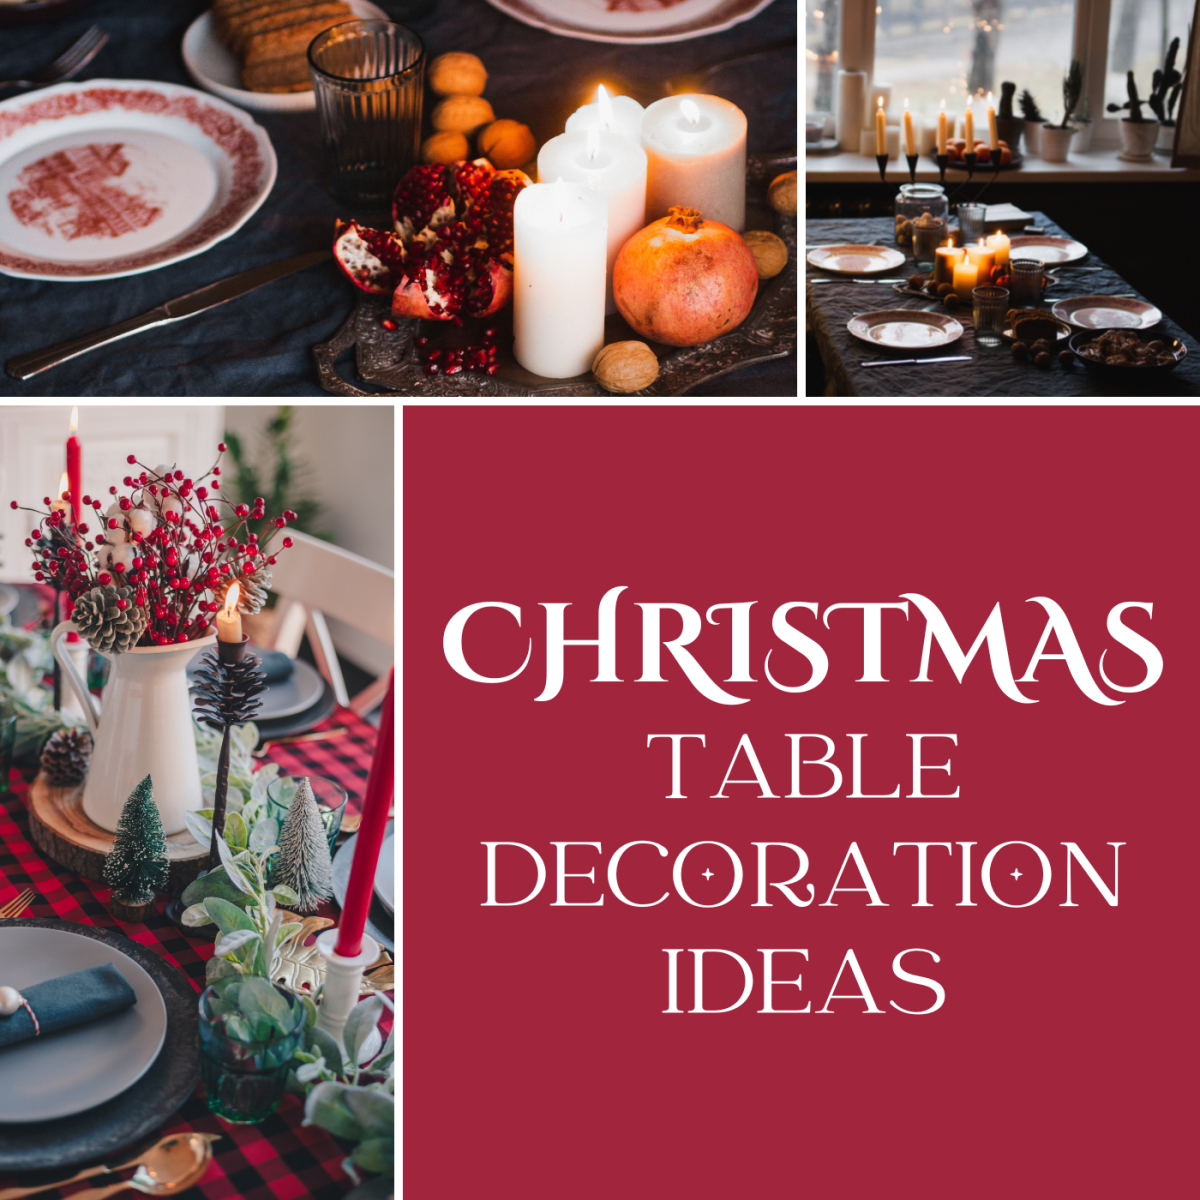 50+ Stunning Christmas Table Decoration Ideas to Bring Festive Cheer